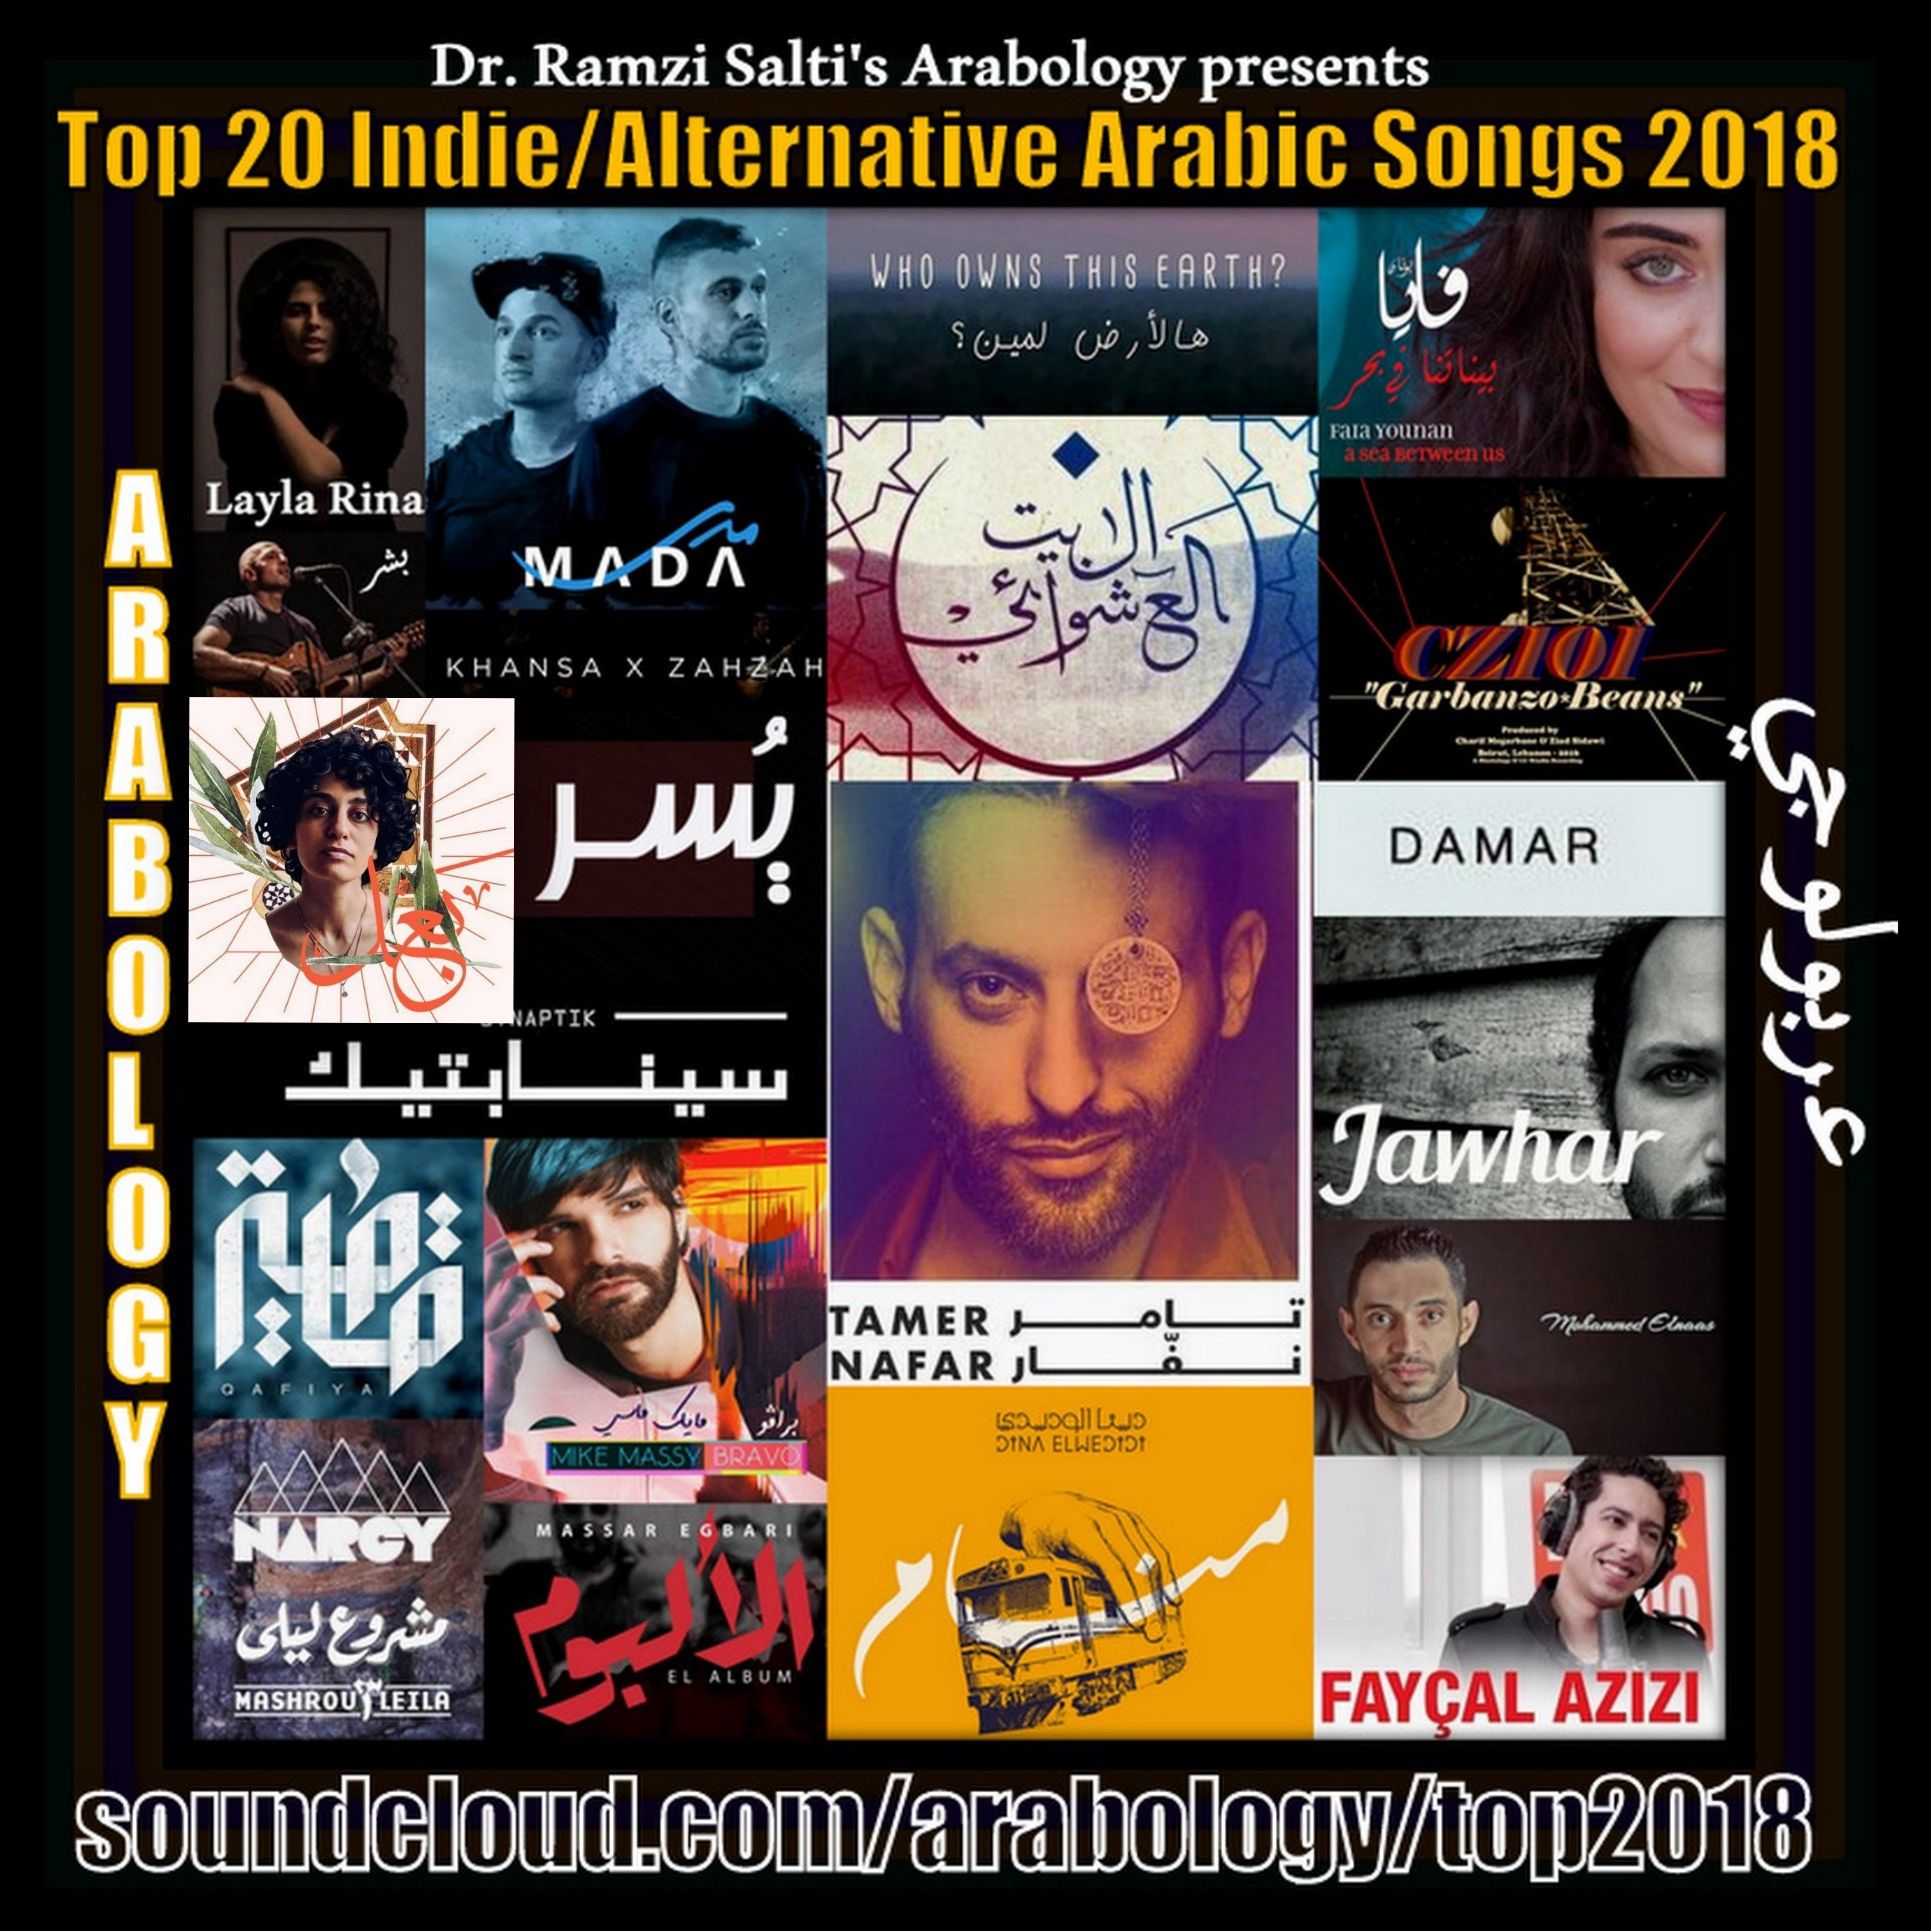 Download Arabology 12.2 [Top 20 Alternative/Indie Arabic Songs of 2018] by  arabology mp3 - Soundcloud to mp3 converter